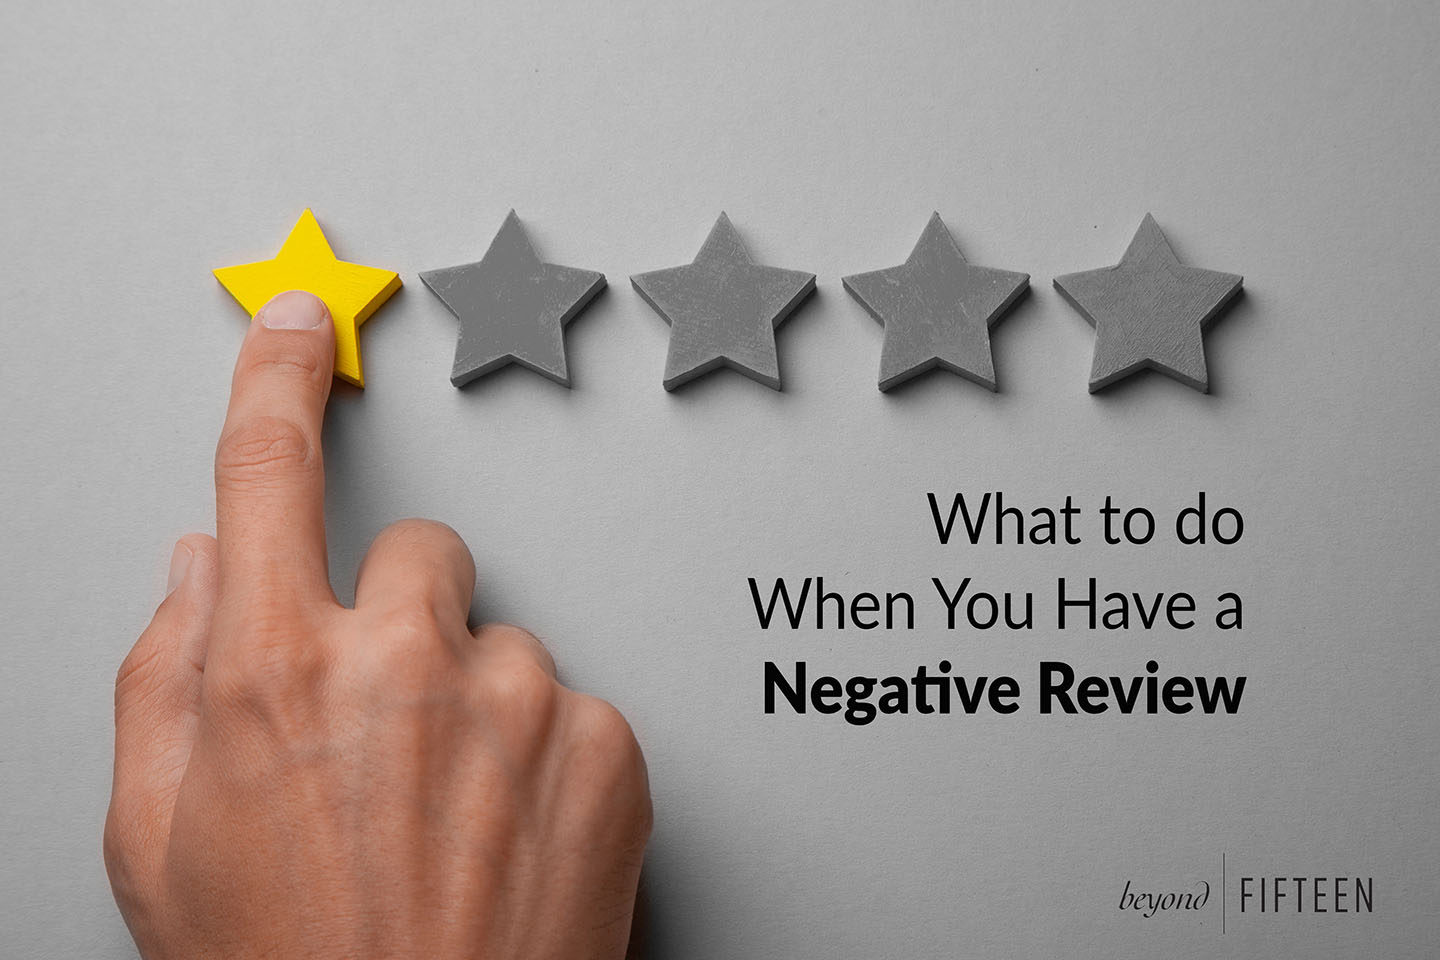 What to do When You Have a Negative Review